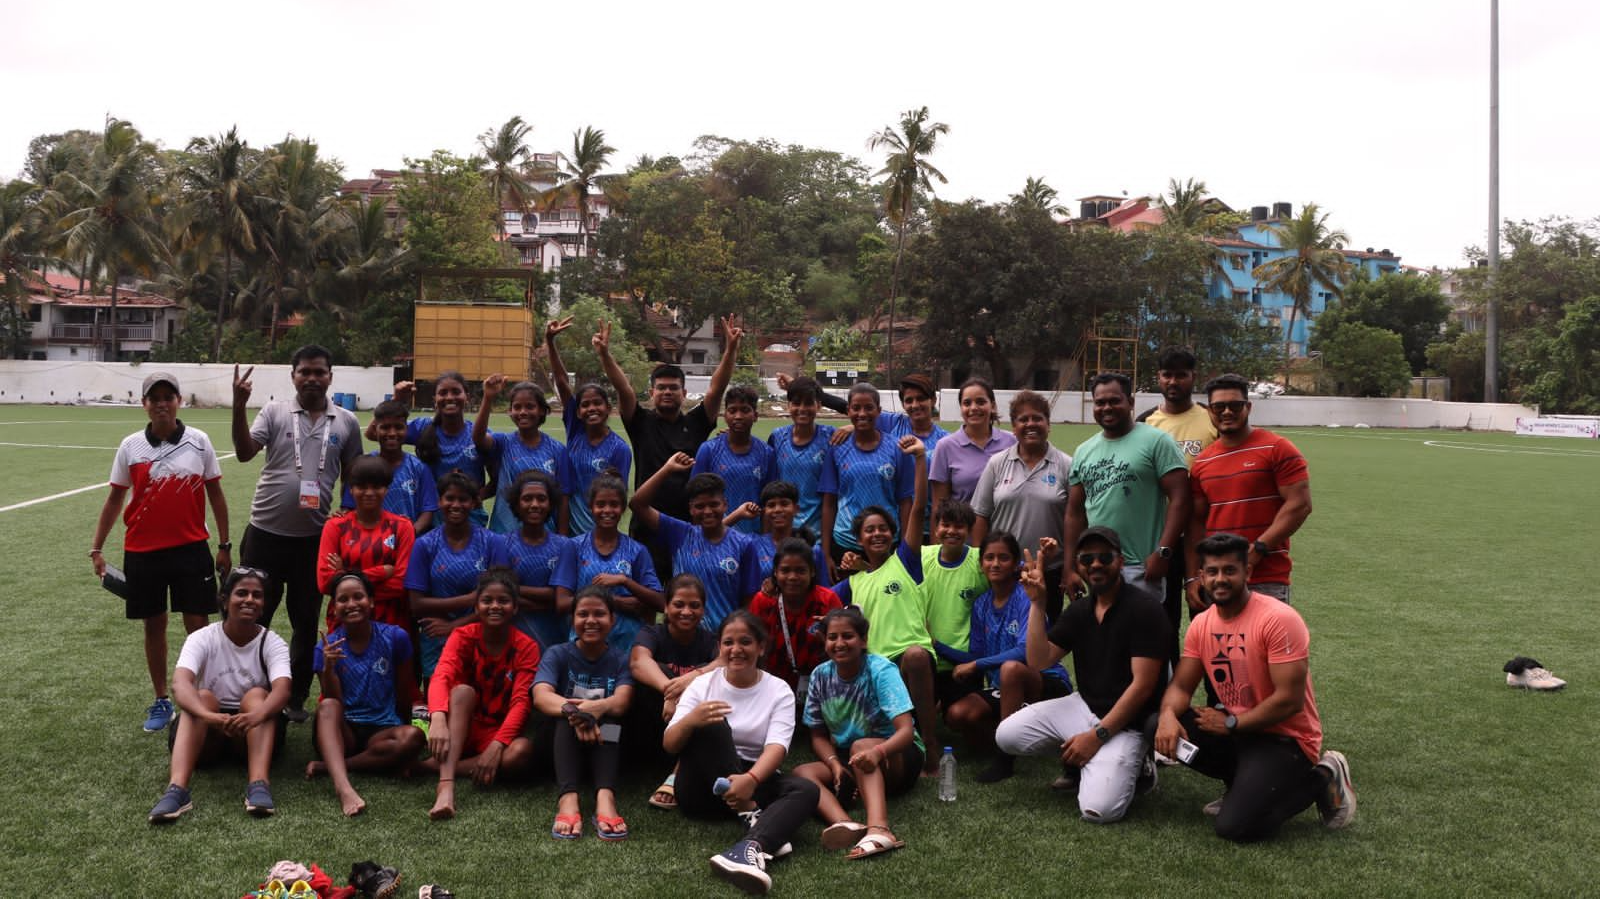 Nita Football Academy scripts history, qualifies for Coveted Indian Women’s League